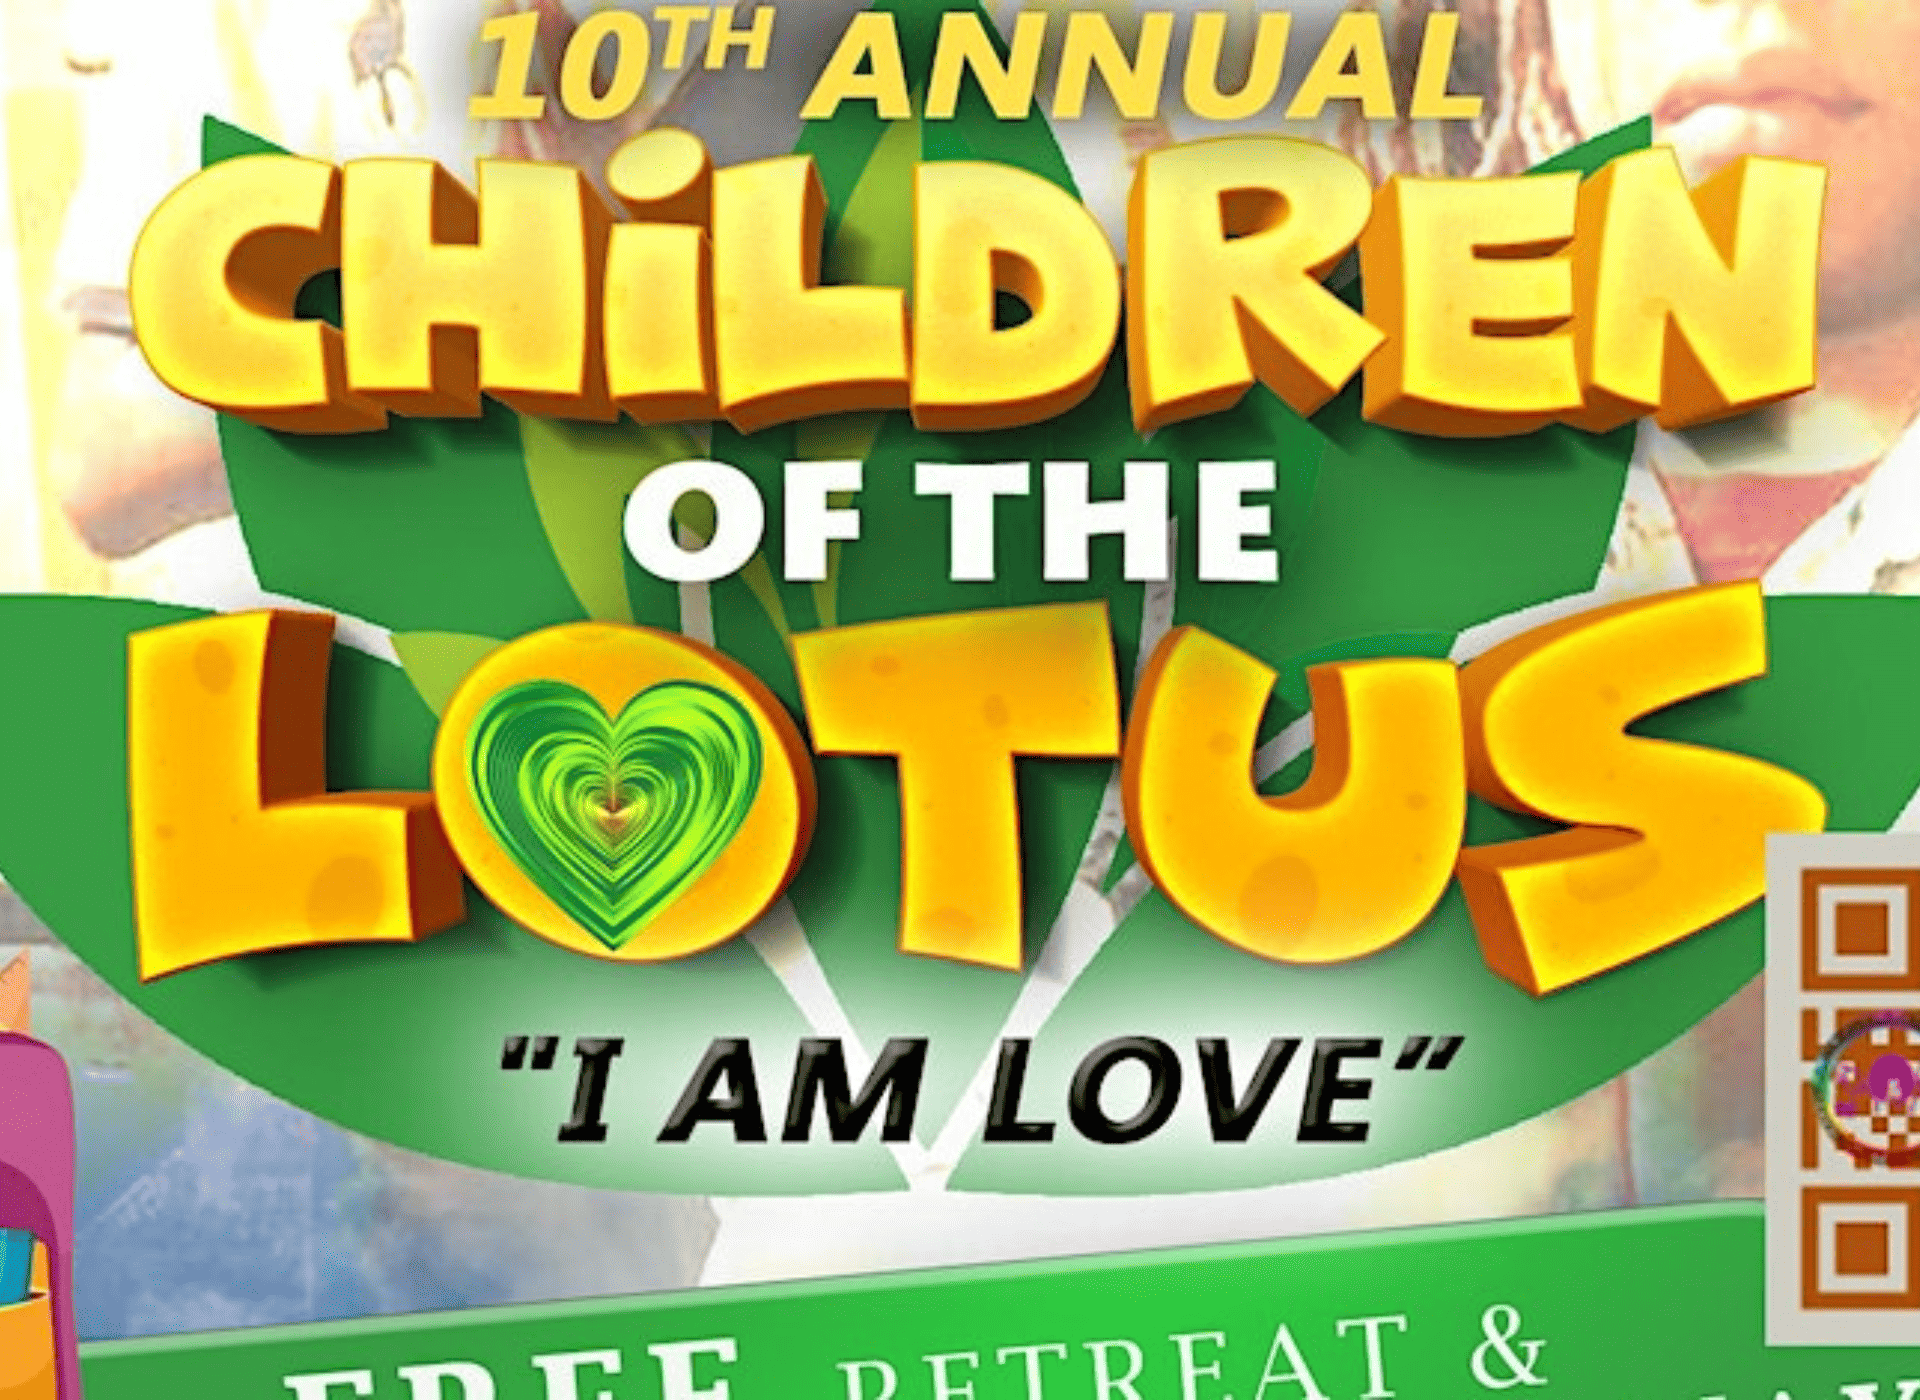 Dreamcatchers for Soul Foundation - 10th Annual Children of the Lotus Retreat